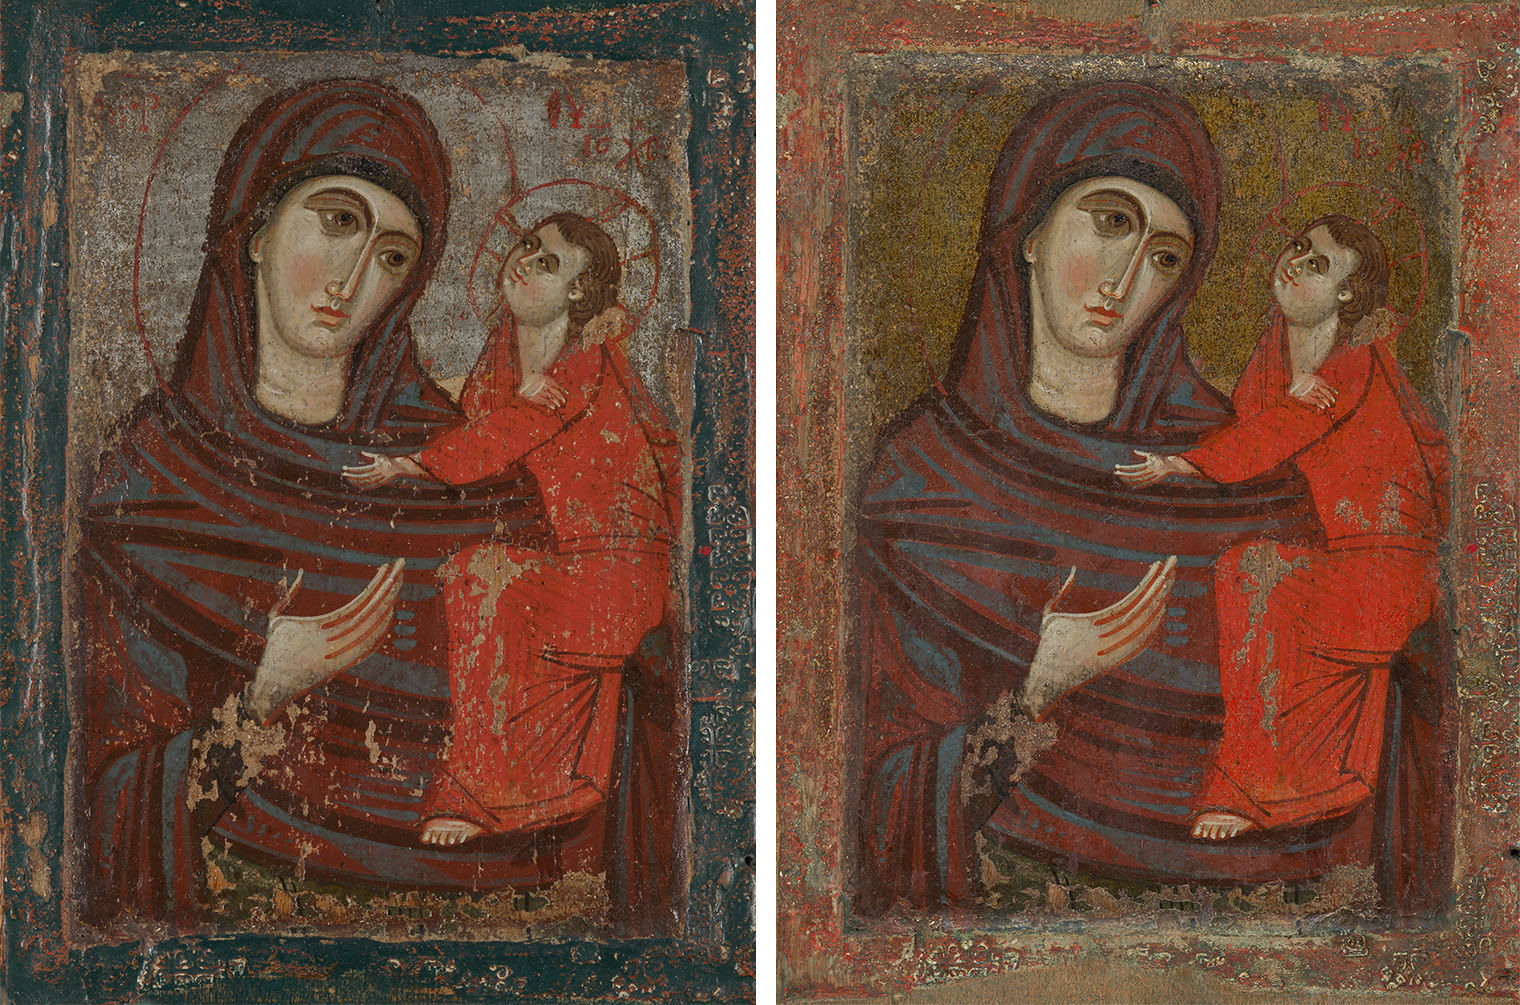 Two images of the same byzantine painting of the virgin and child. On the left the virgin holds christ with her right hand outwards wearing a green-red rob that goes over her head. On the right is the child christ in a bright red robe. The color of the border on the left is green and the border on the right is red. The image on the left is much more run down with noticeable chips.